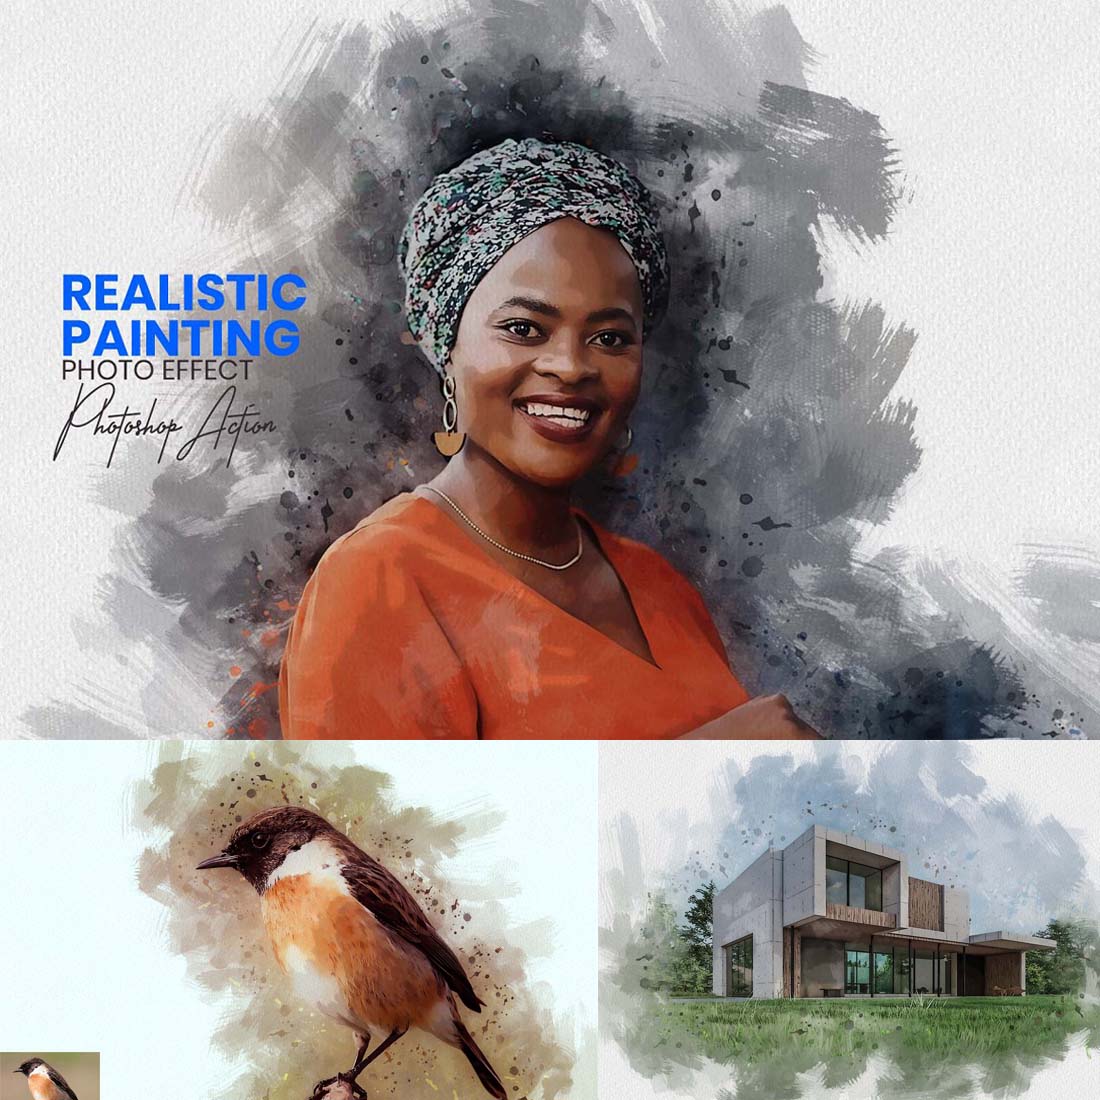 Realistic Painting Photoshop Action cover image.